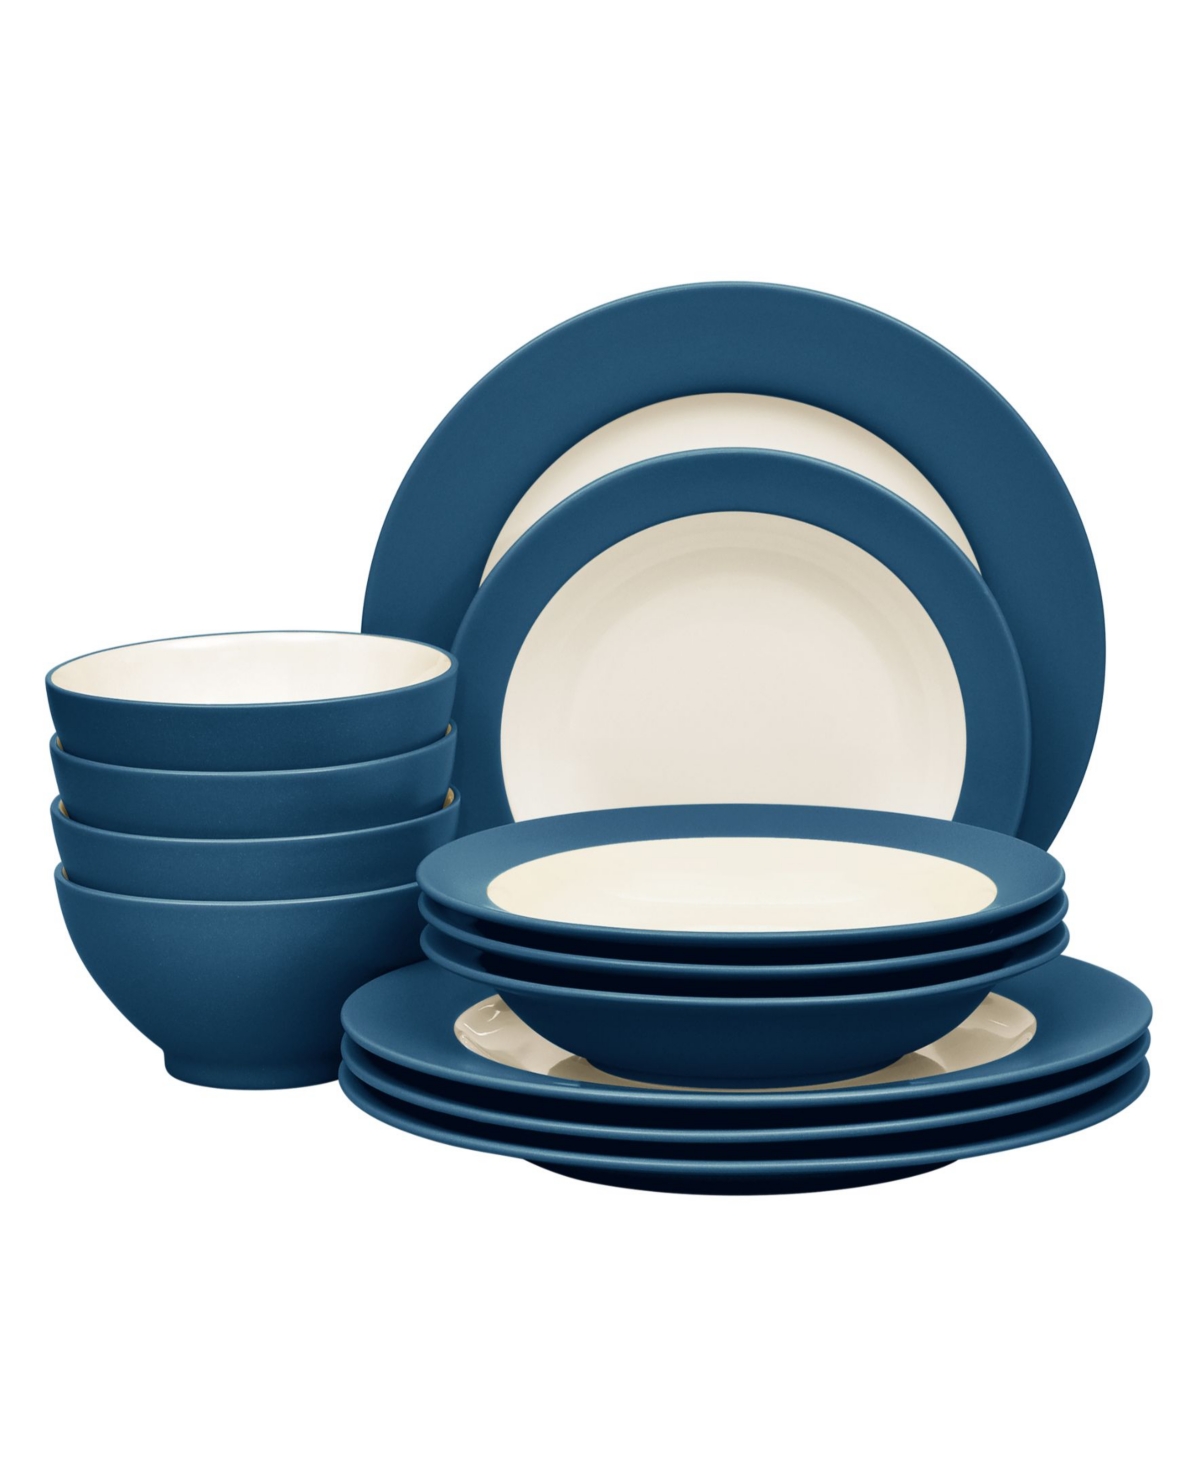 Colorwave Rim 12-Piece Dinnerware Set, Service for 4, Created for Macy's - Blue